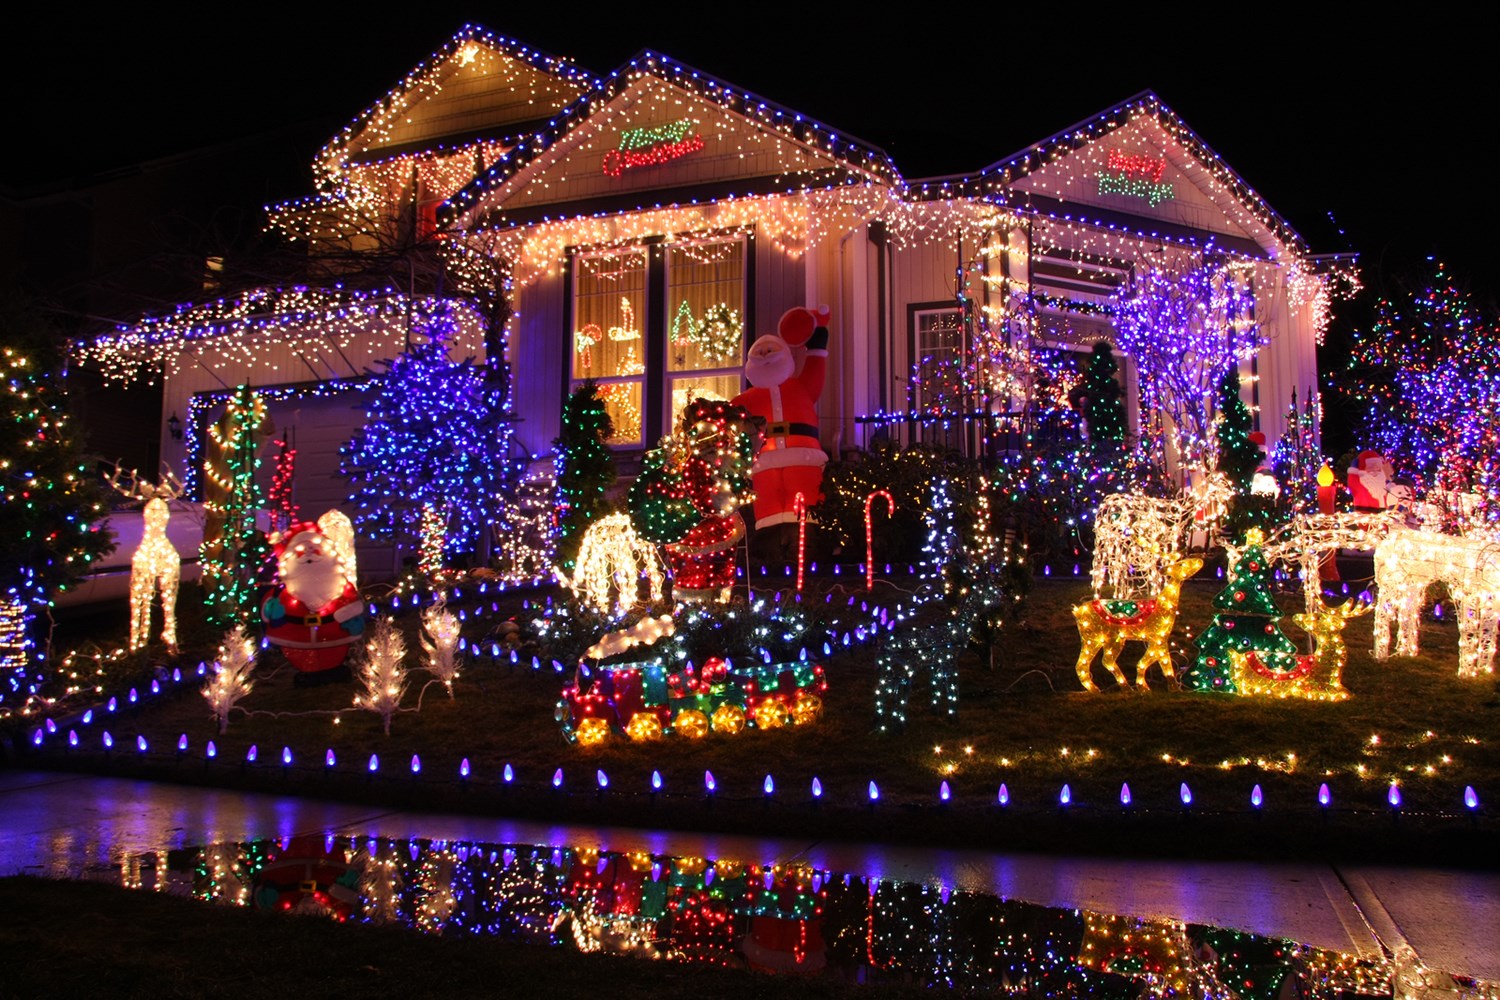 Christmas Light Competition